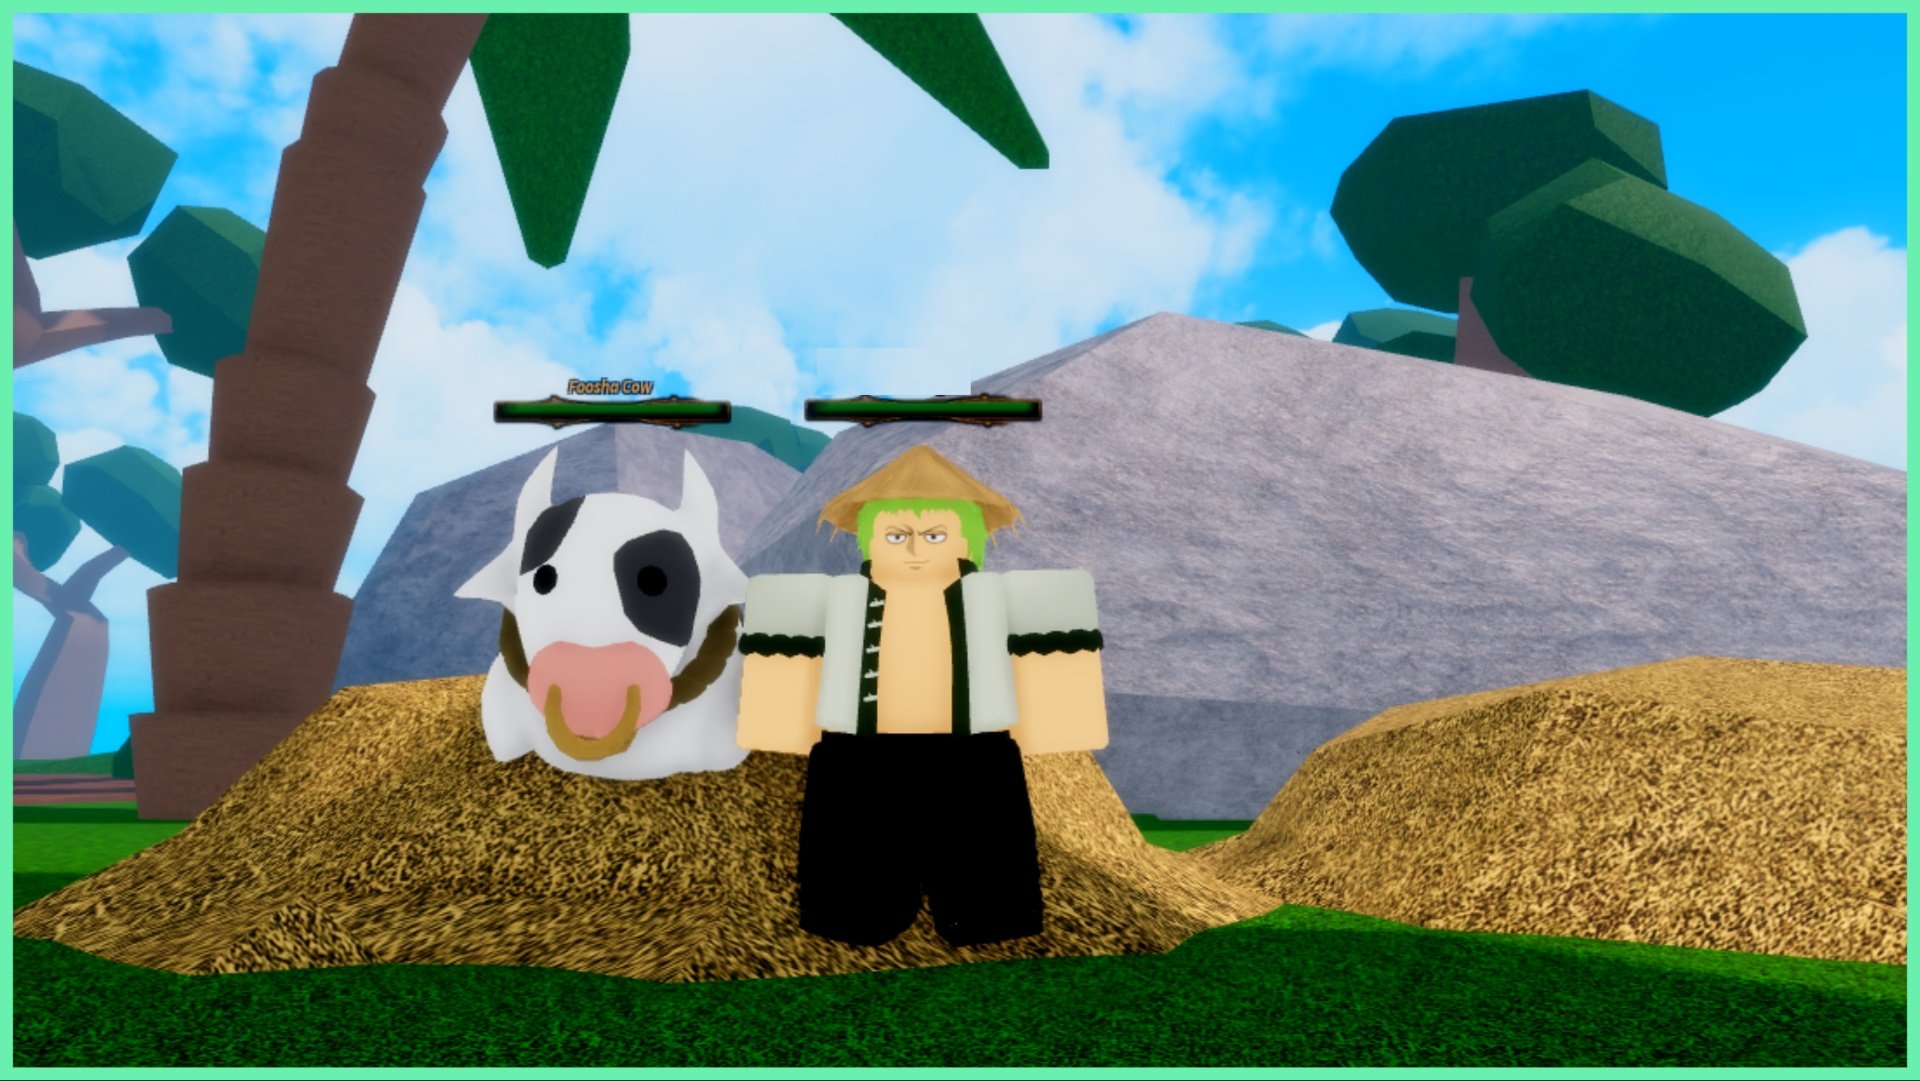 Feature image for our Legacy Piece Accessories guide showing a character cosplaying as Zoro stood next to one of the cattle cows of Fusha Island. Around them is various tan piles of hay, and behind them is a large grey rock and an an assortment of green tropical trees